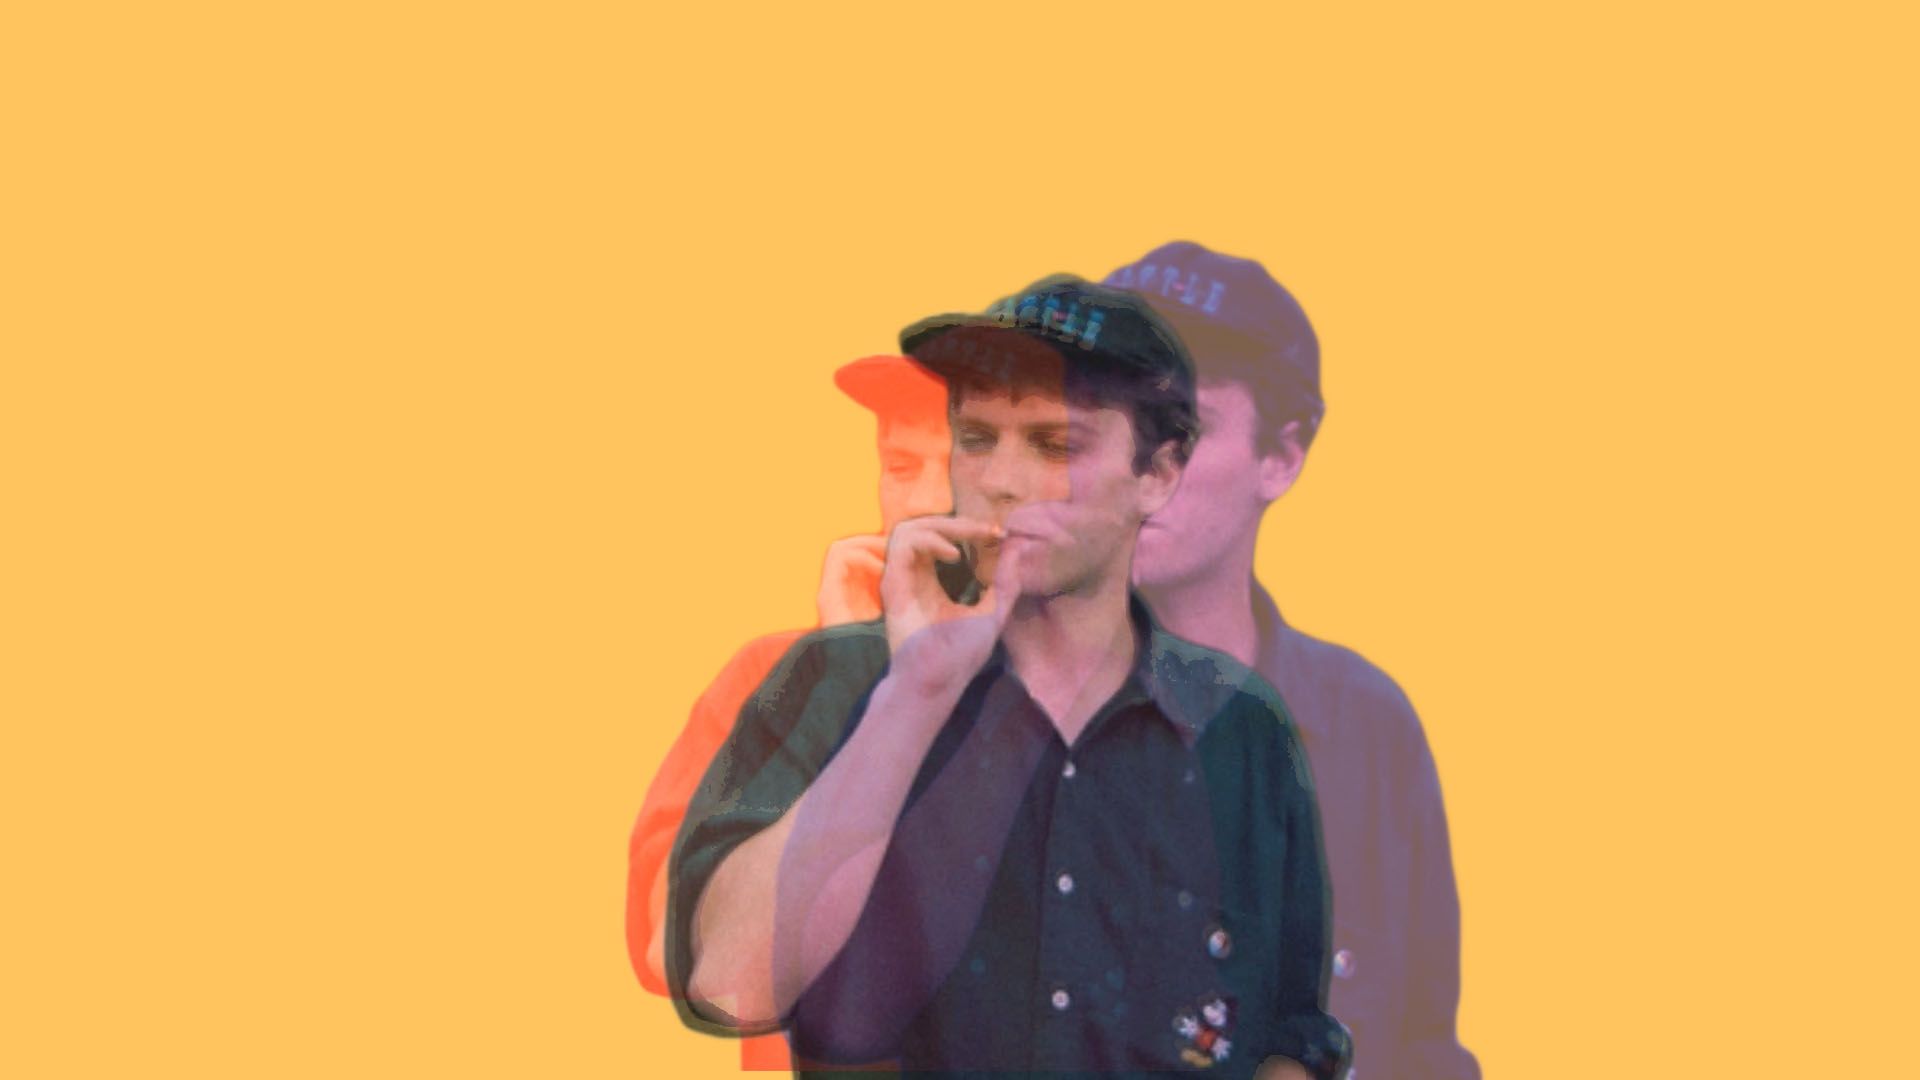 Mac Wallpaper I Made Macdemarco Background For iPhone